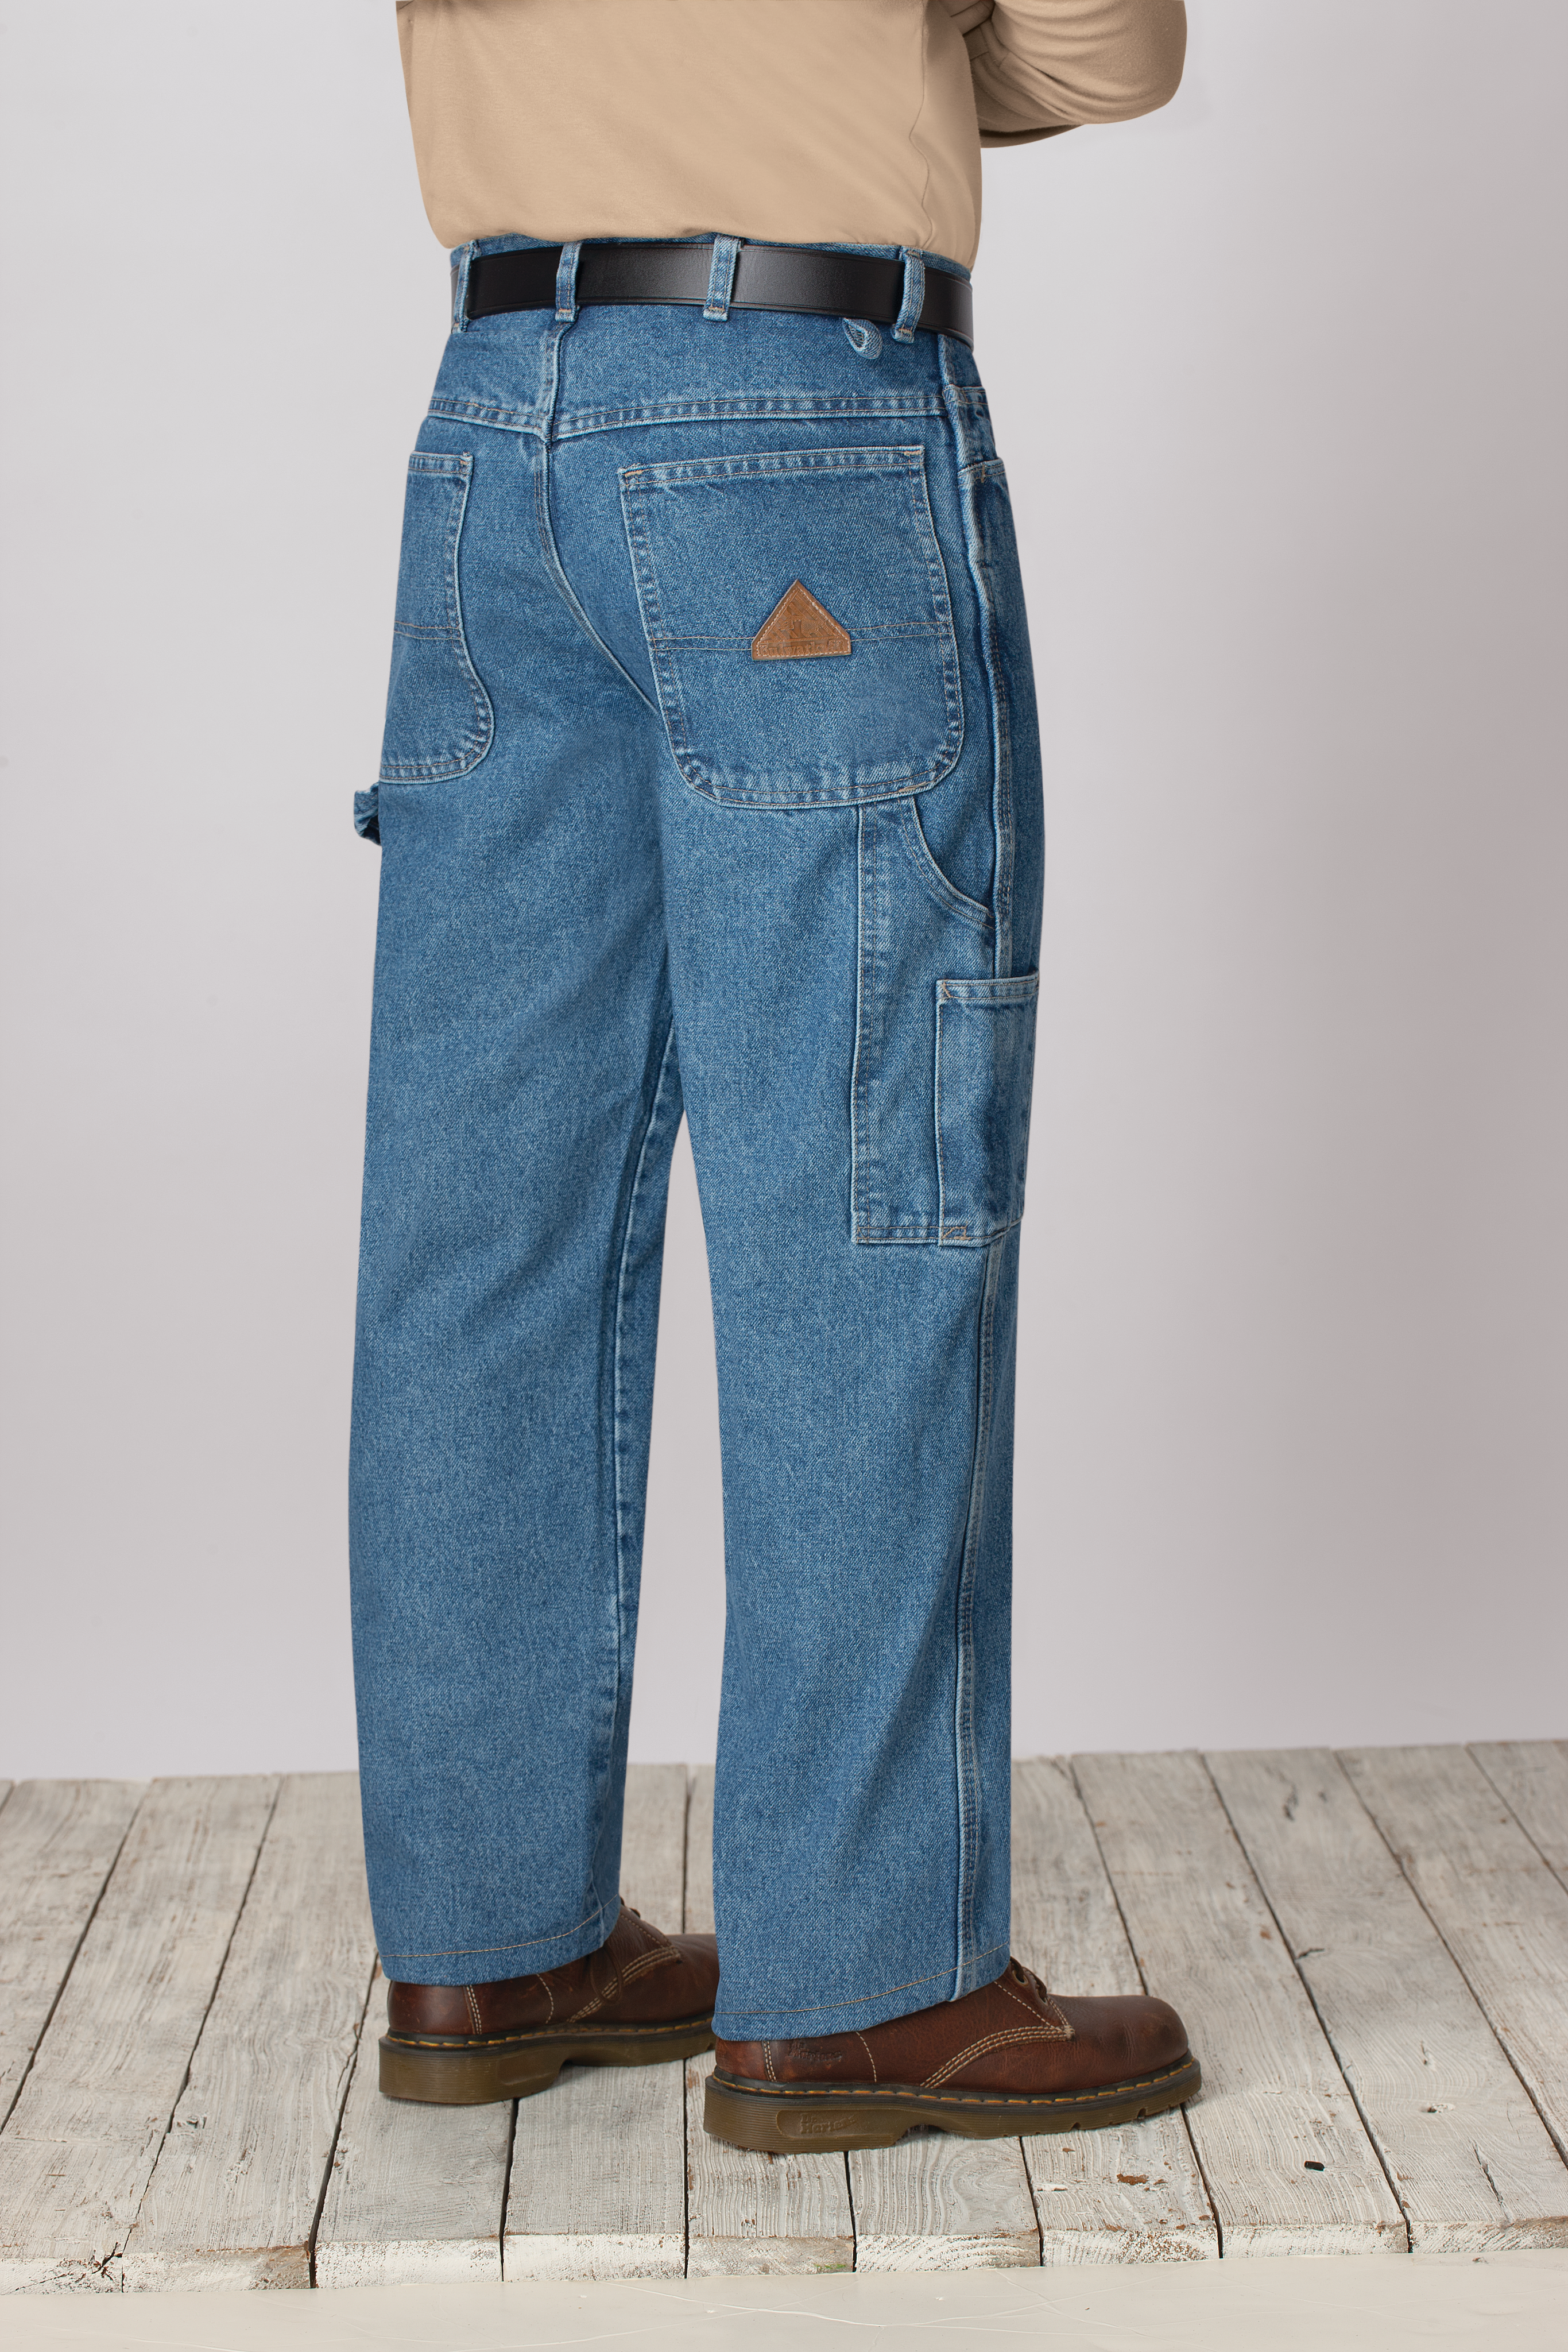 Bulwark Flame Resistant Work Pants  Second Rodeo